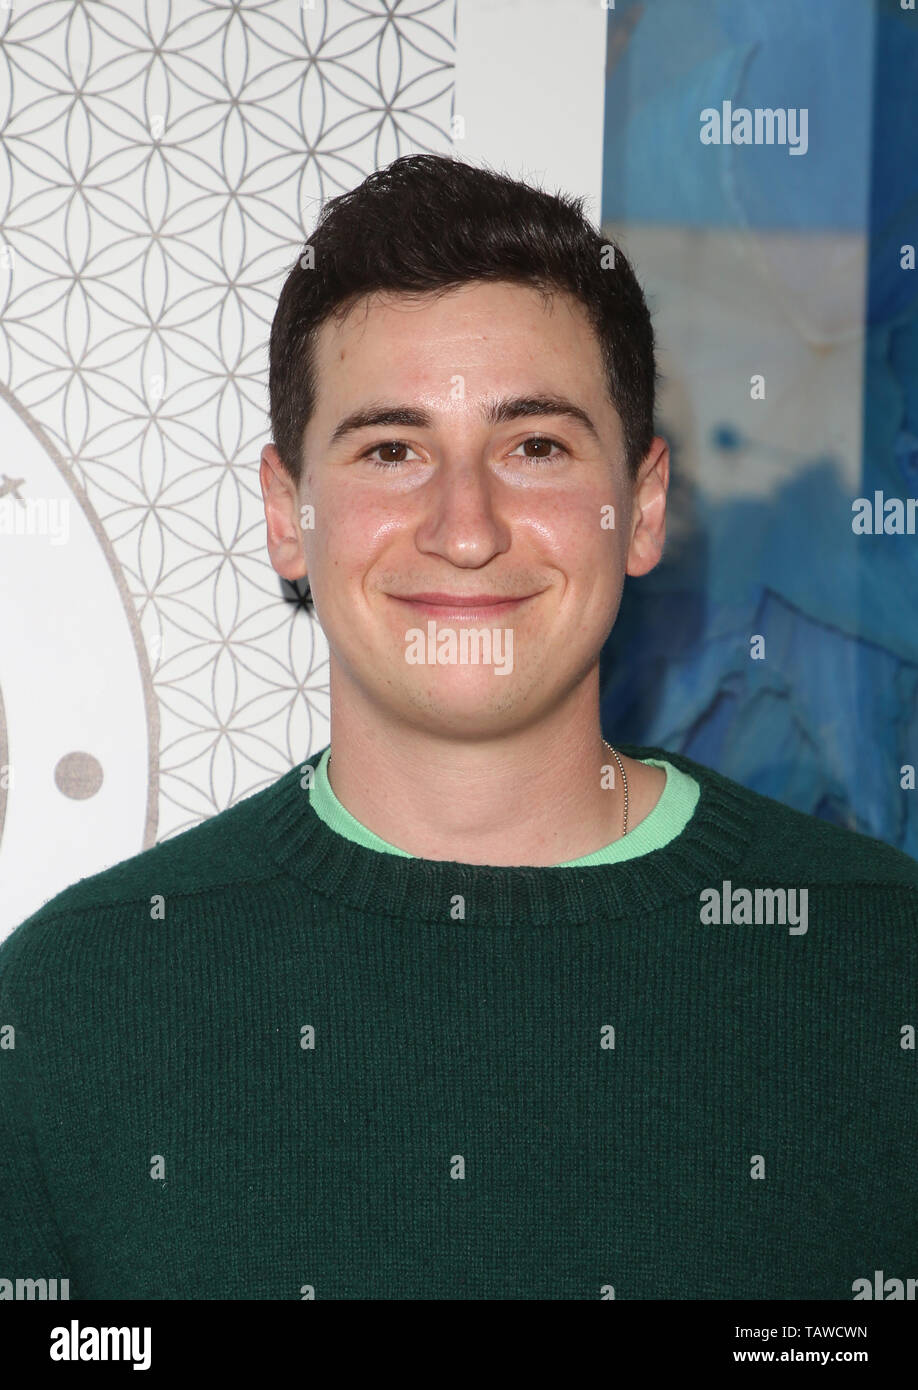 Los Angeles, Ca, USA. 28th May, 2019. Sam Lerner, at Hayley Orrantia Celebrates New EP 'The Way Out' at The Harmonist on May 23, 2019 in Los Angeles., California on May 28, 2019. Credit: Faye Sadou/Media Punch/Alamy Live News Stock Photo